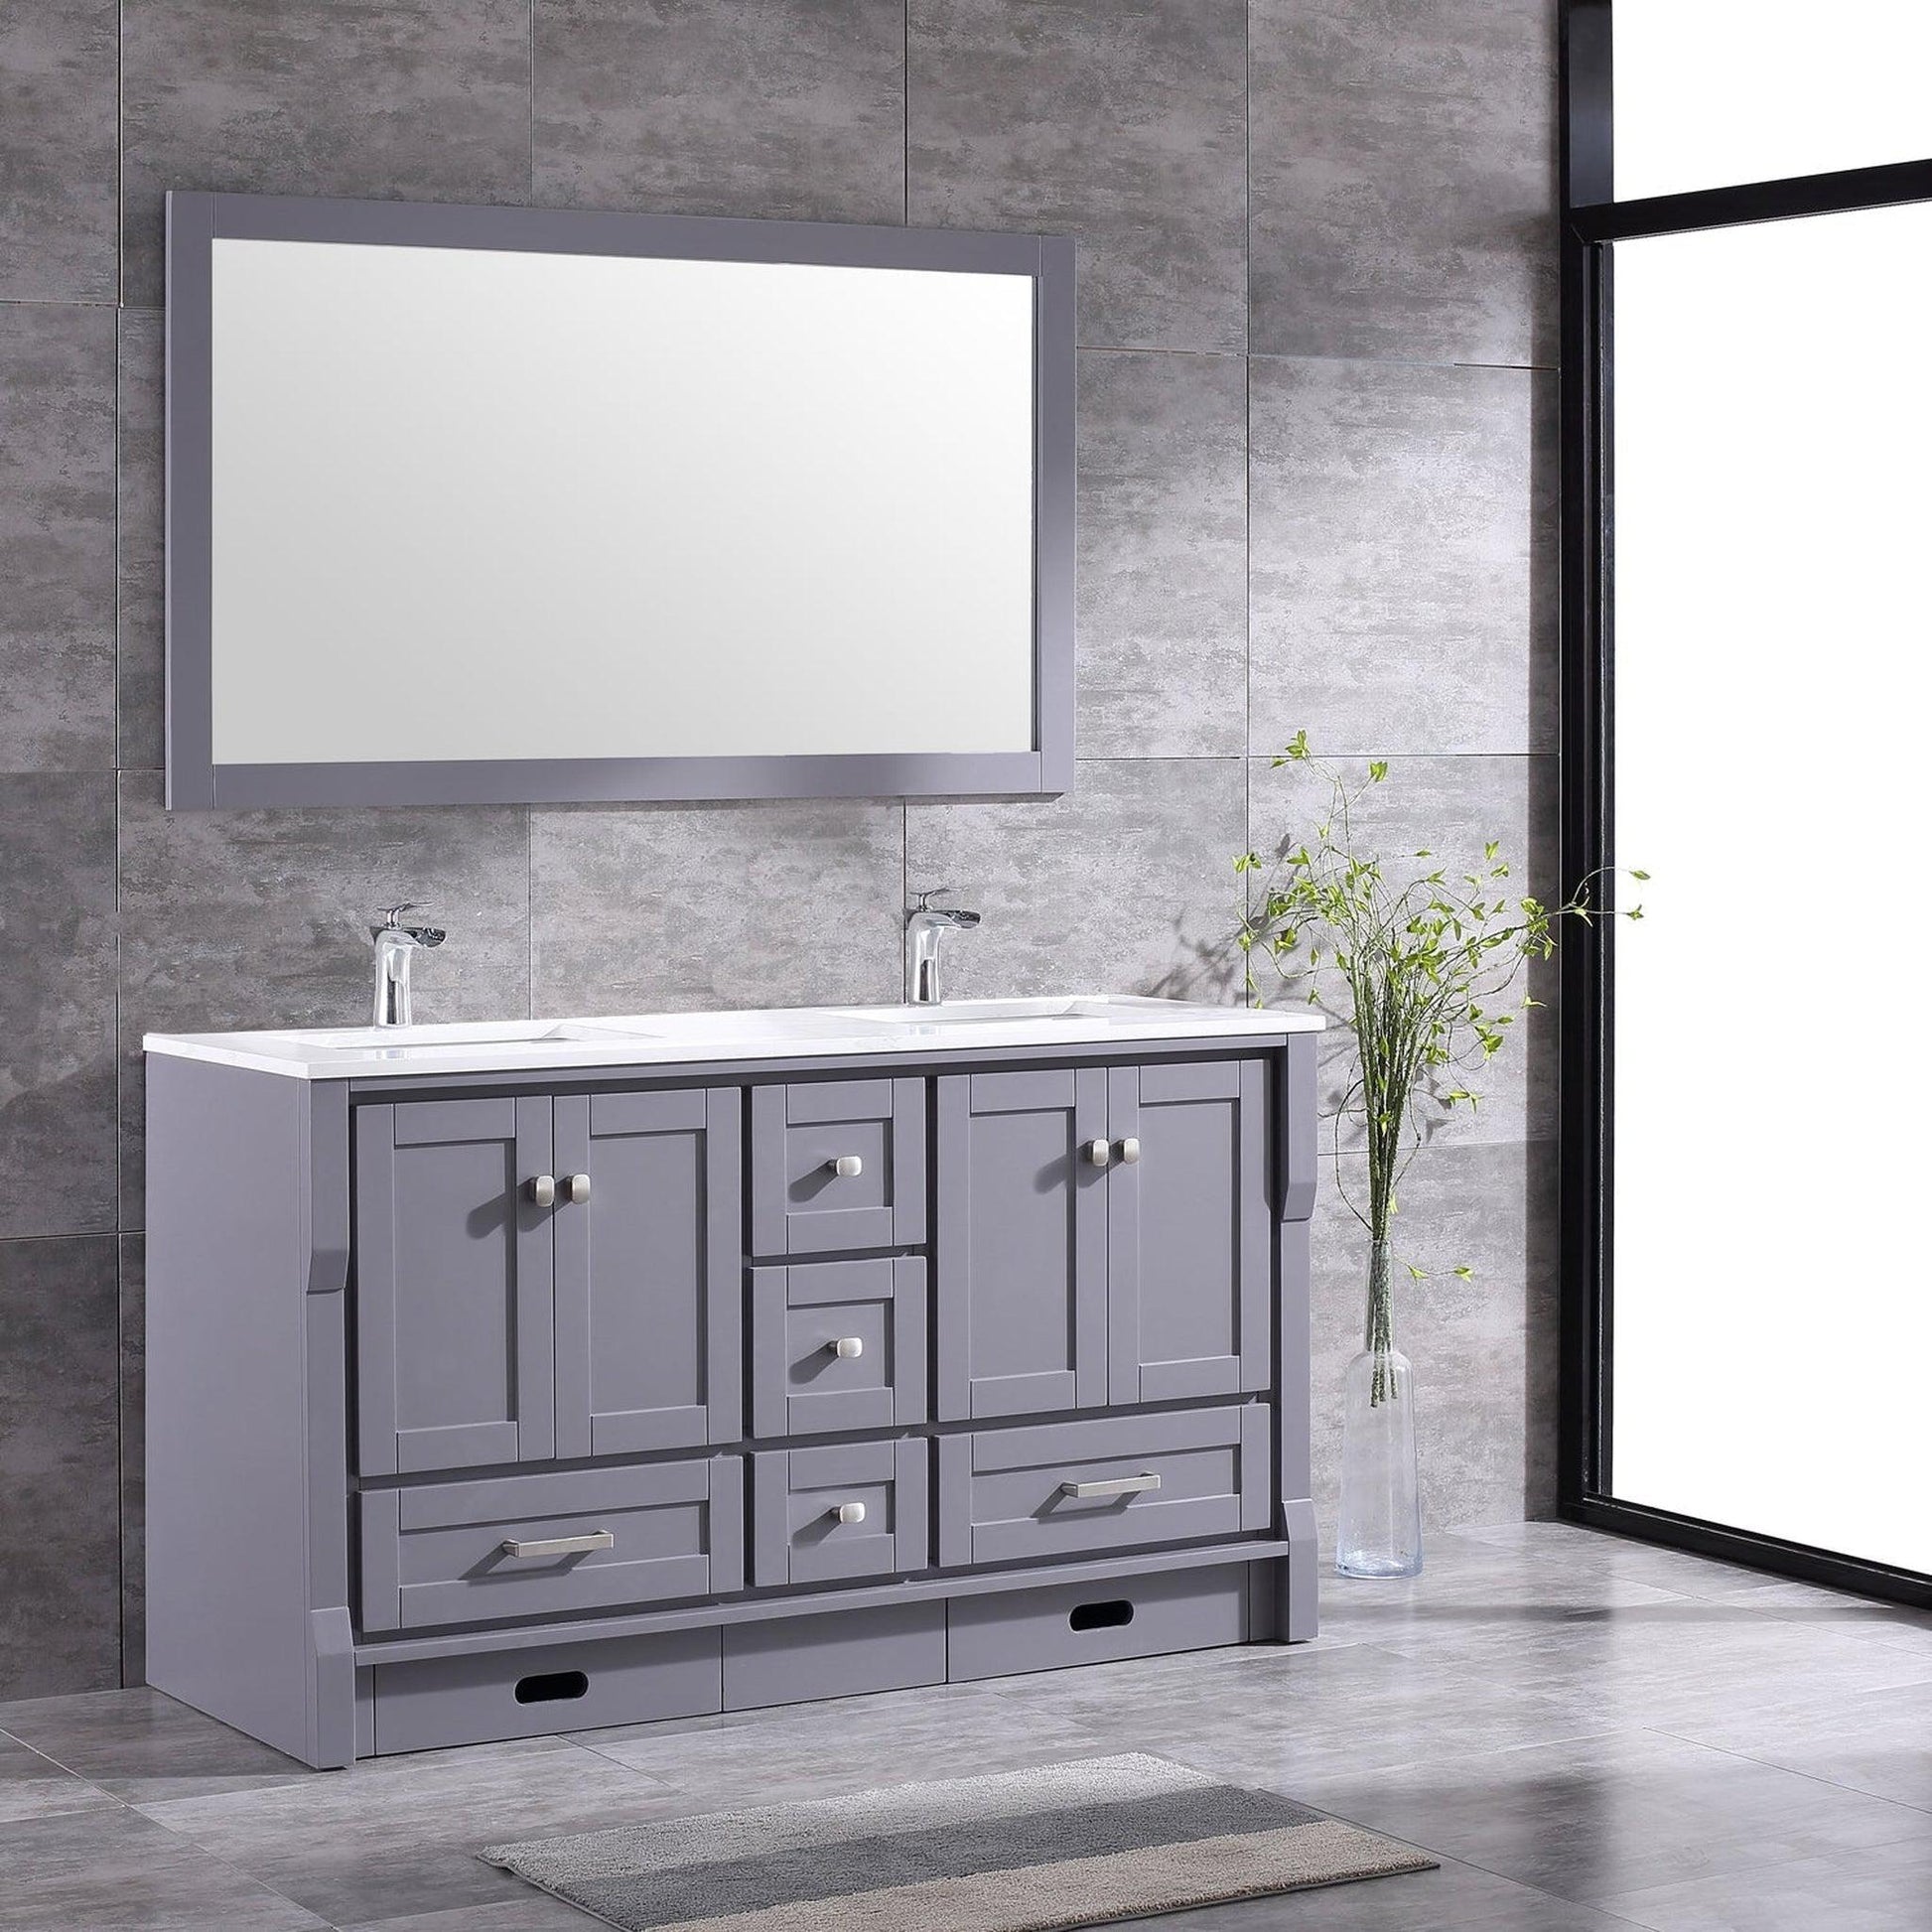 Eviva Booster 60” x 34” Gray Freestanding Bathroom Vanity With White Carrara Marble Countertop and Double Undermount Sink